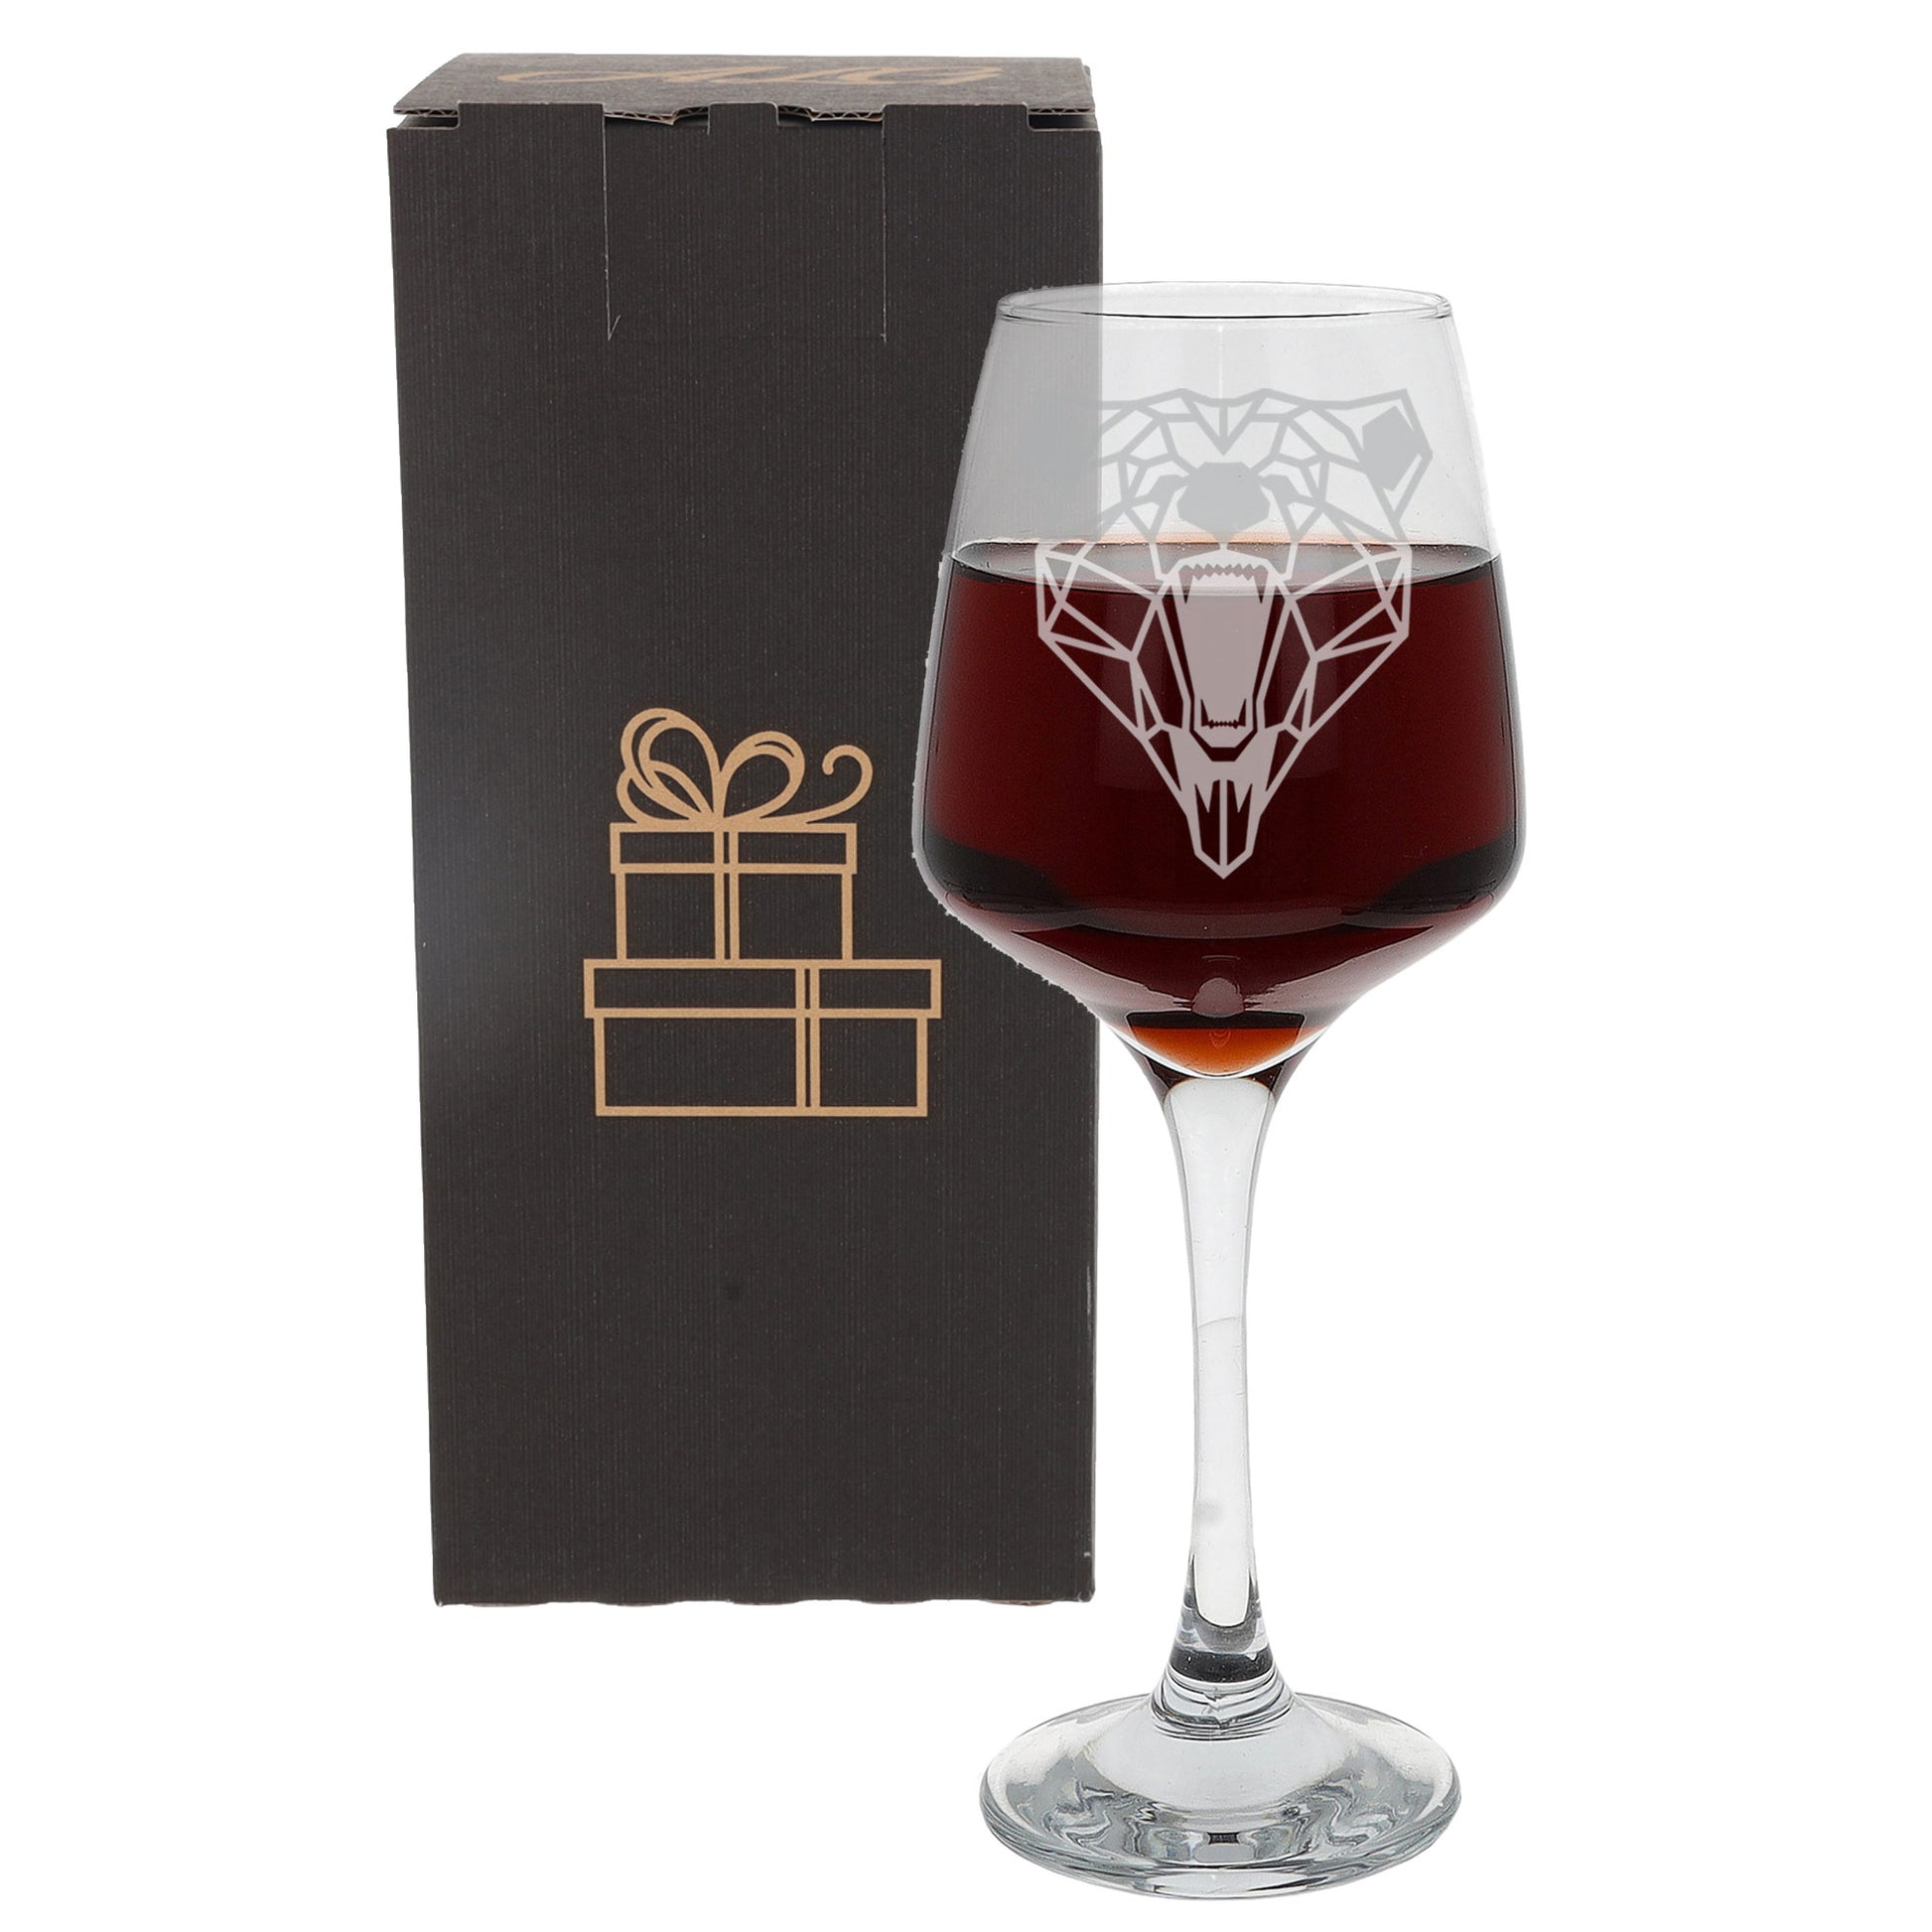 Grizzly Bear Engraved Wine Glass  - Always Looking Good -   